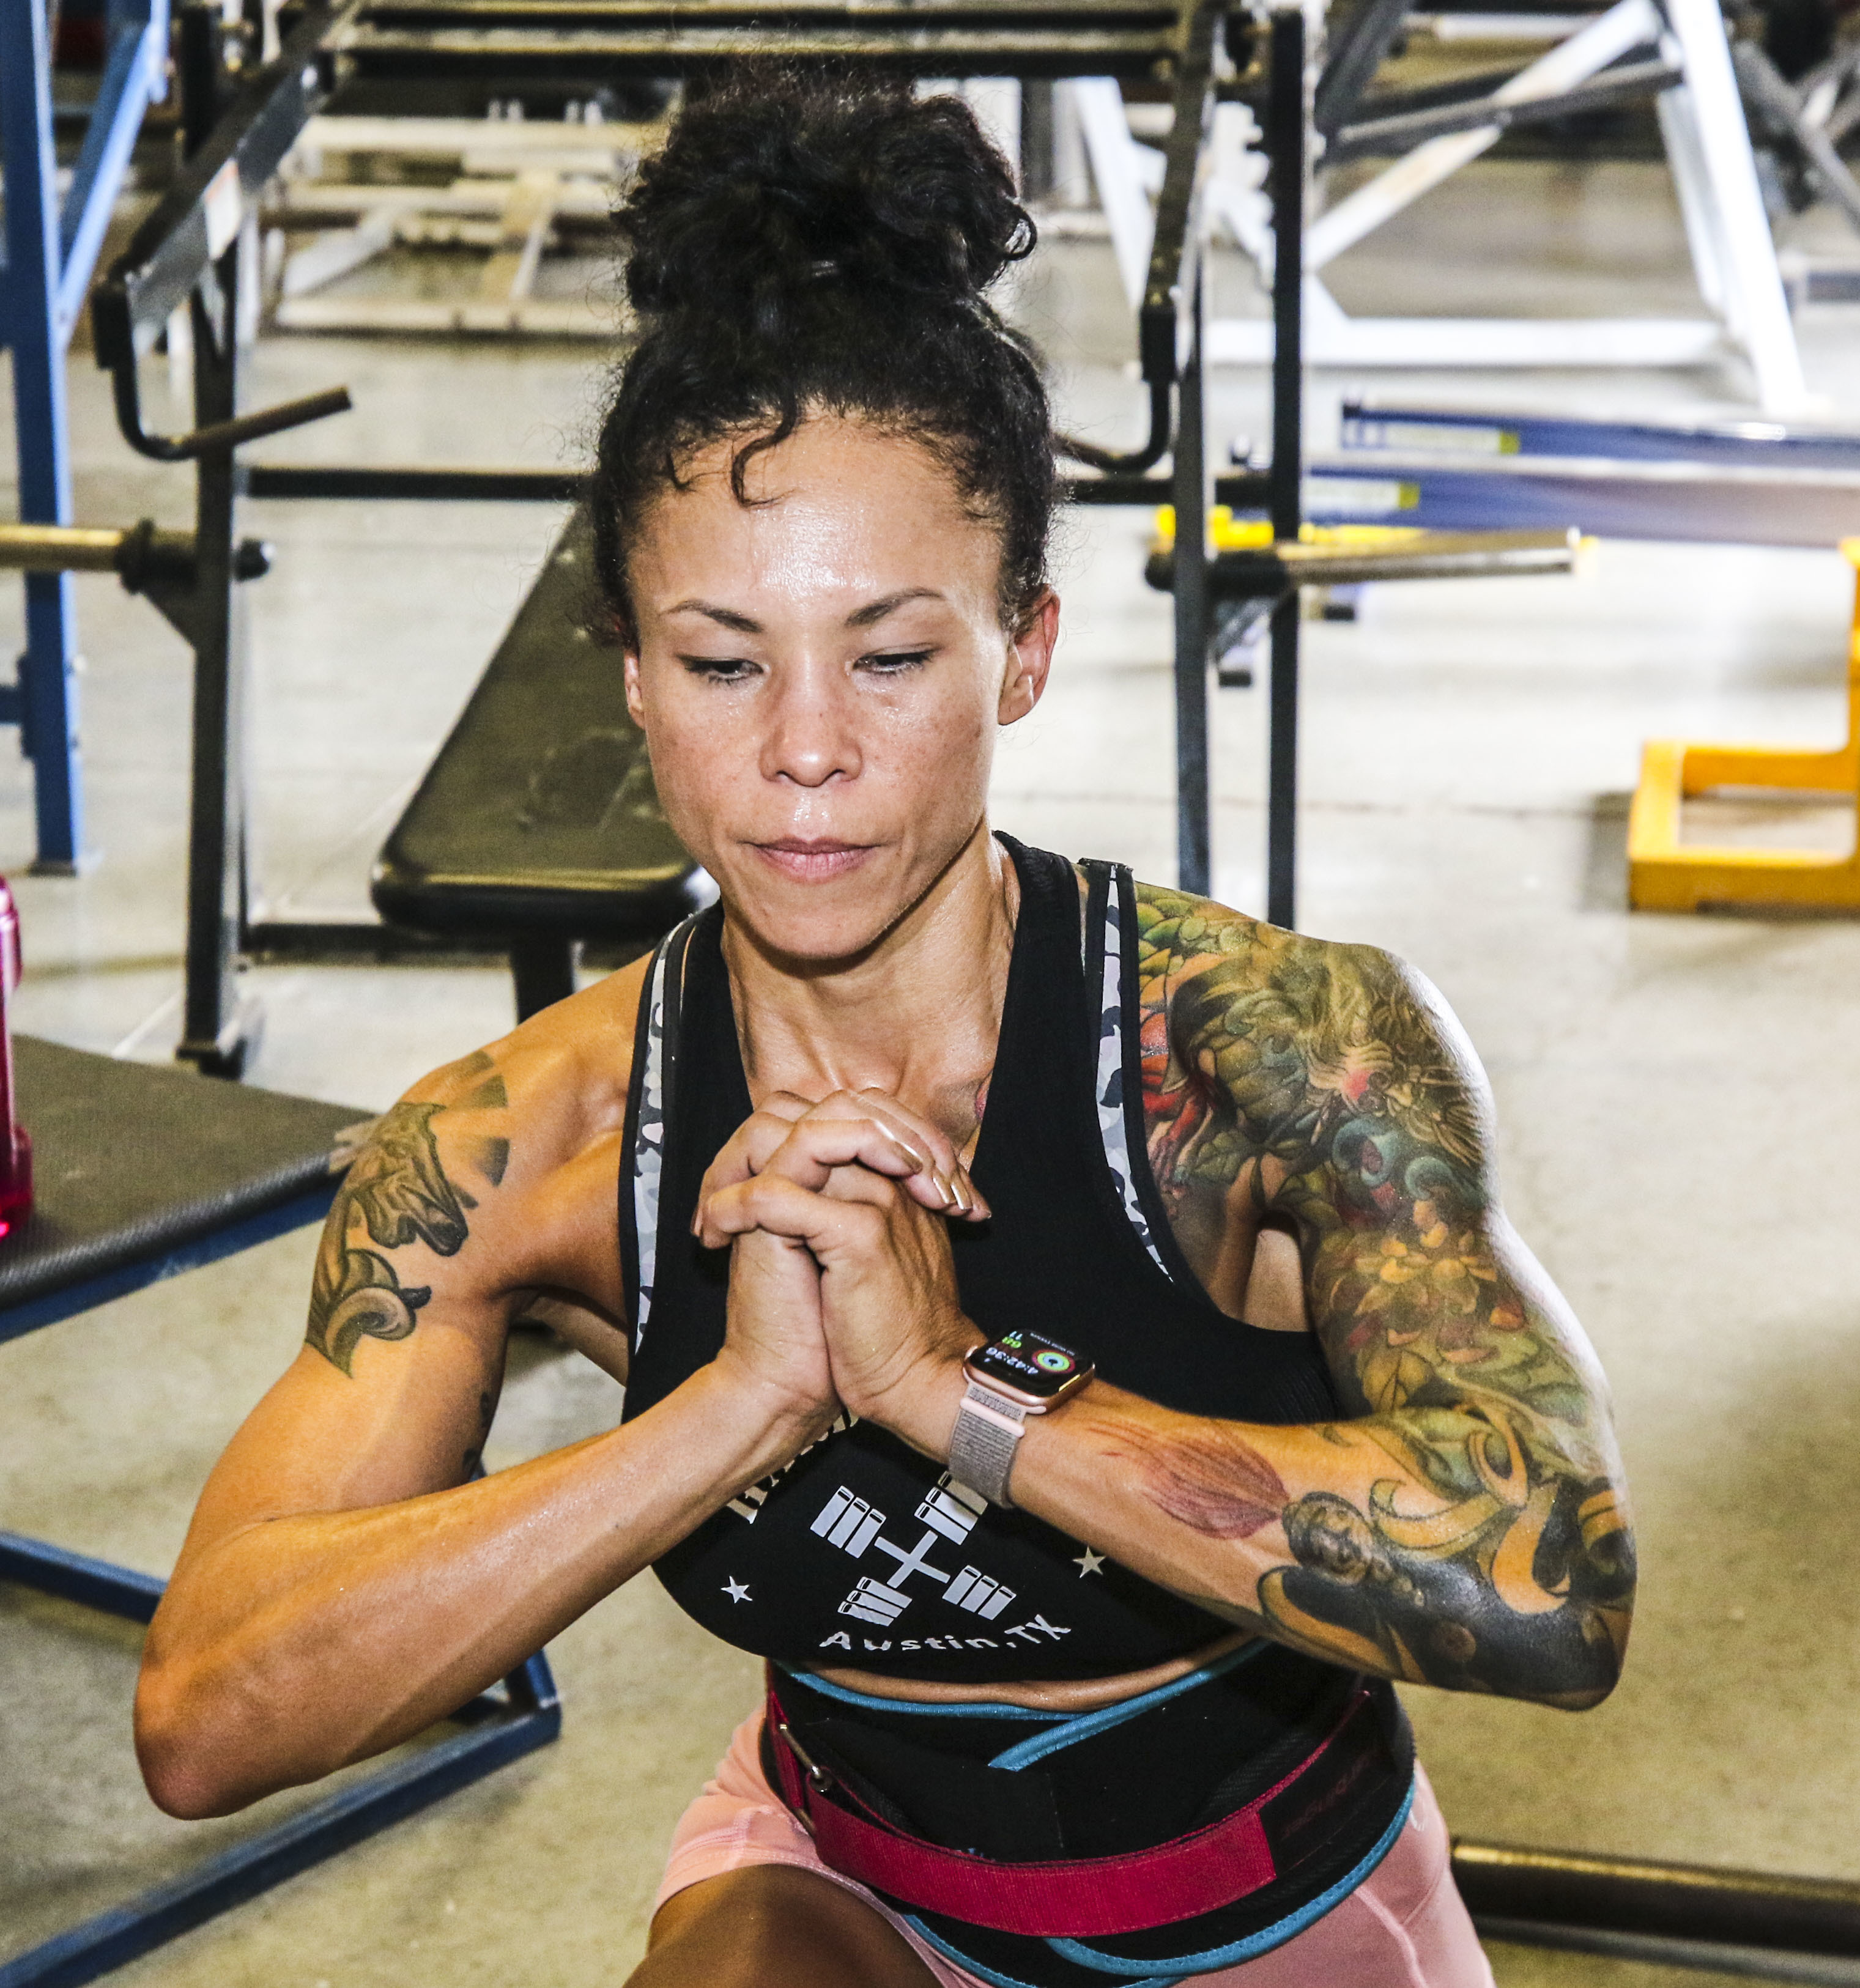 Staff Sgt. Kimberly Goana's training for a national body building competition includes two hours of cardio per day, one hour of weight lifting per day, and six to seven meals to build muscle. 